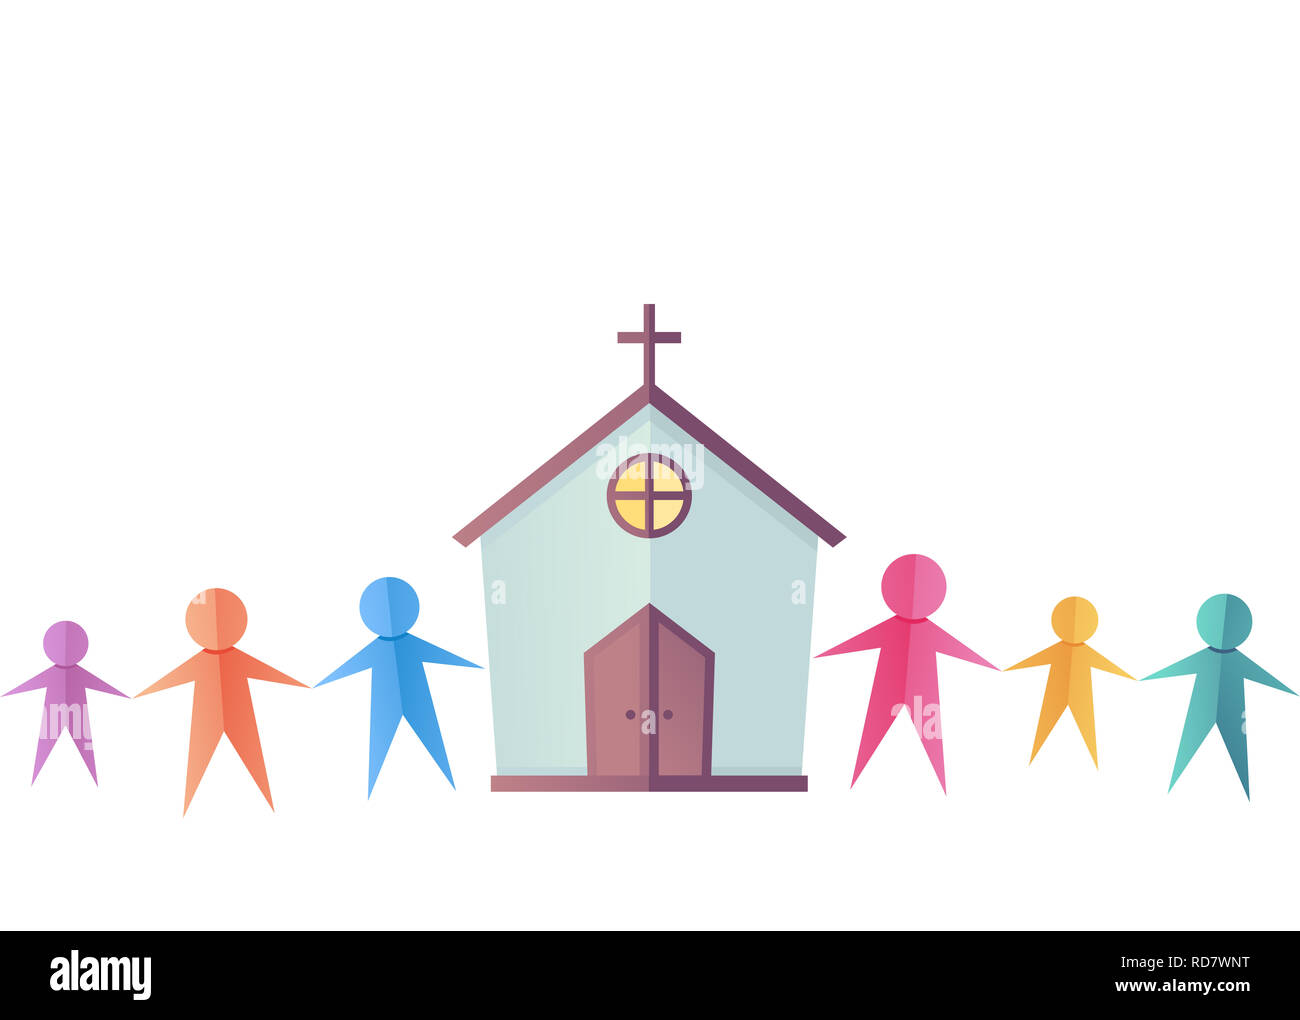 Illustration of People Paper Cut Outs with a Church. Religious Community Stock Photo